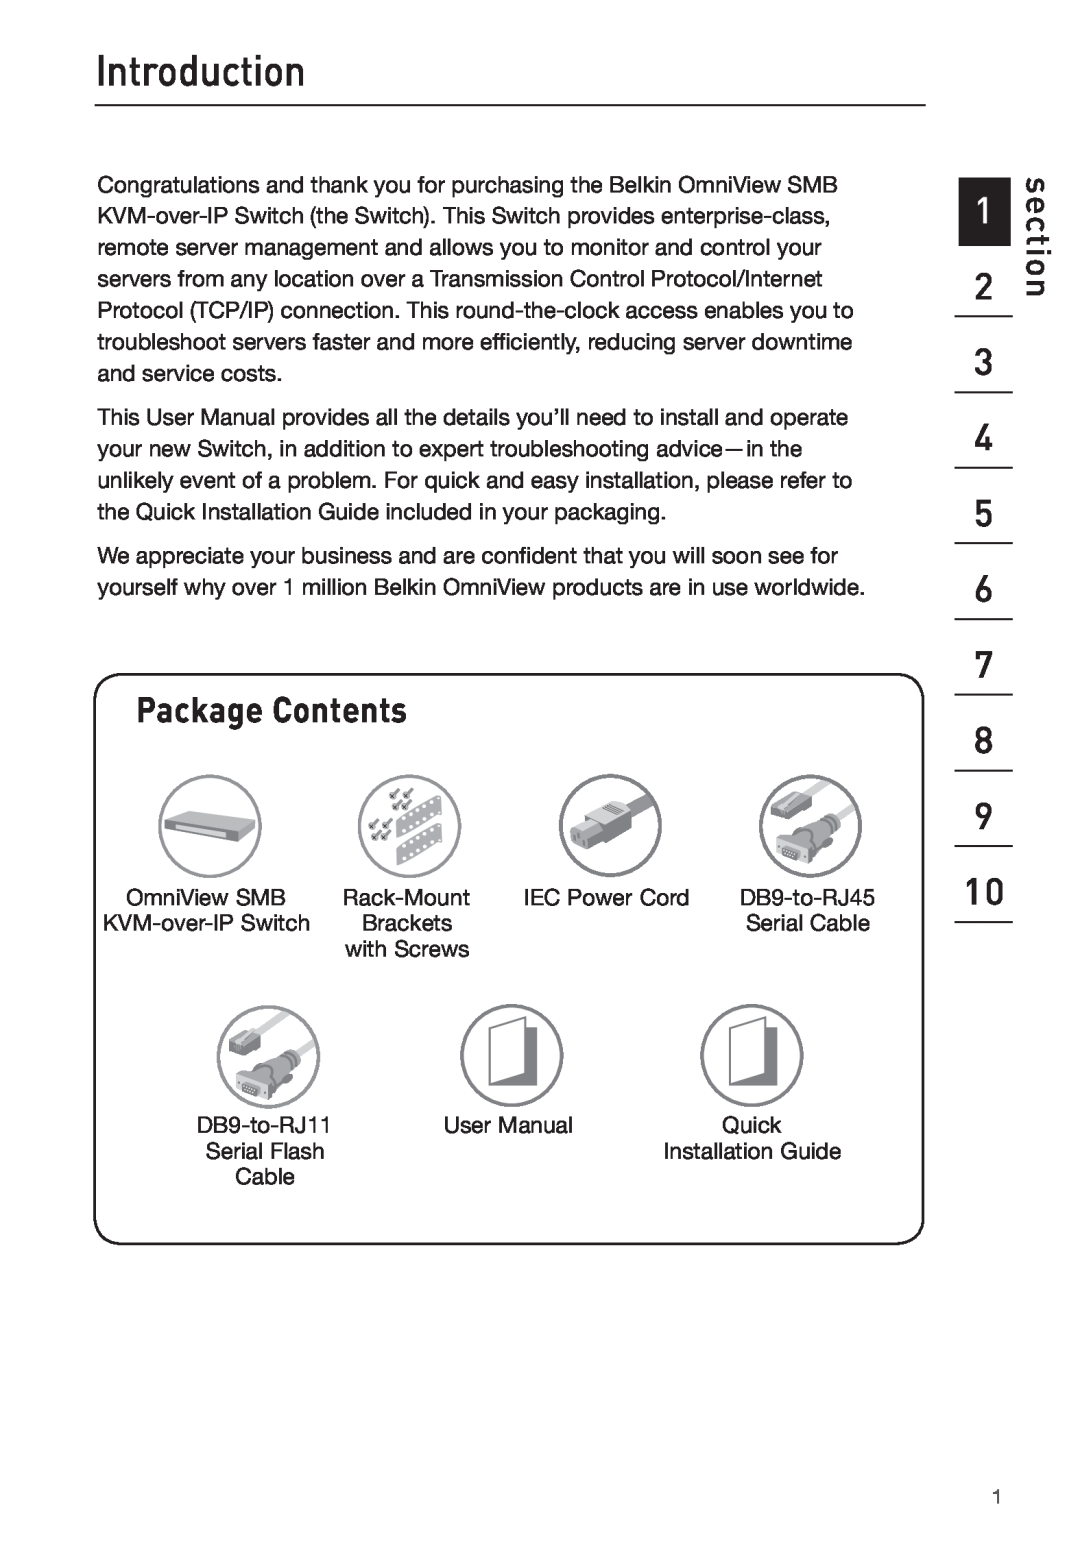 Belkin F1DP108G user manual Introduction, Package Contents, section 